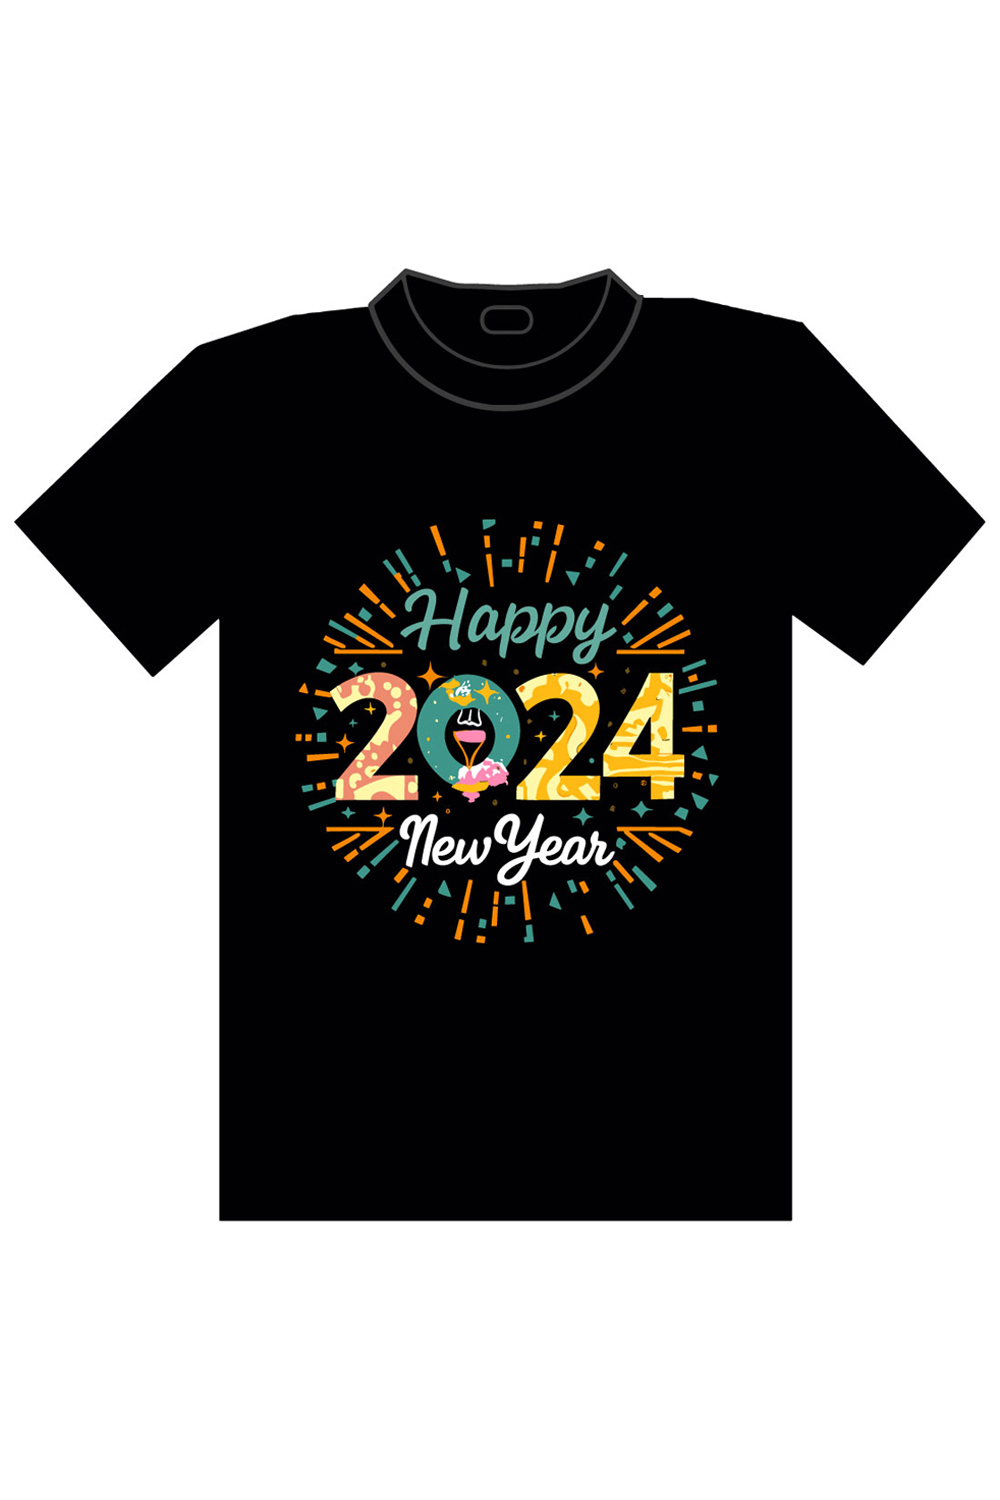 Happy New Year 2024 T shirt Design Download - Latest Design For Men and Women pinterest preview image.